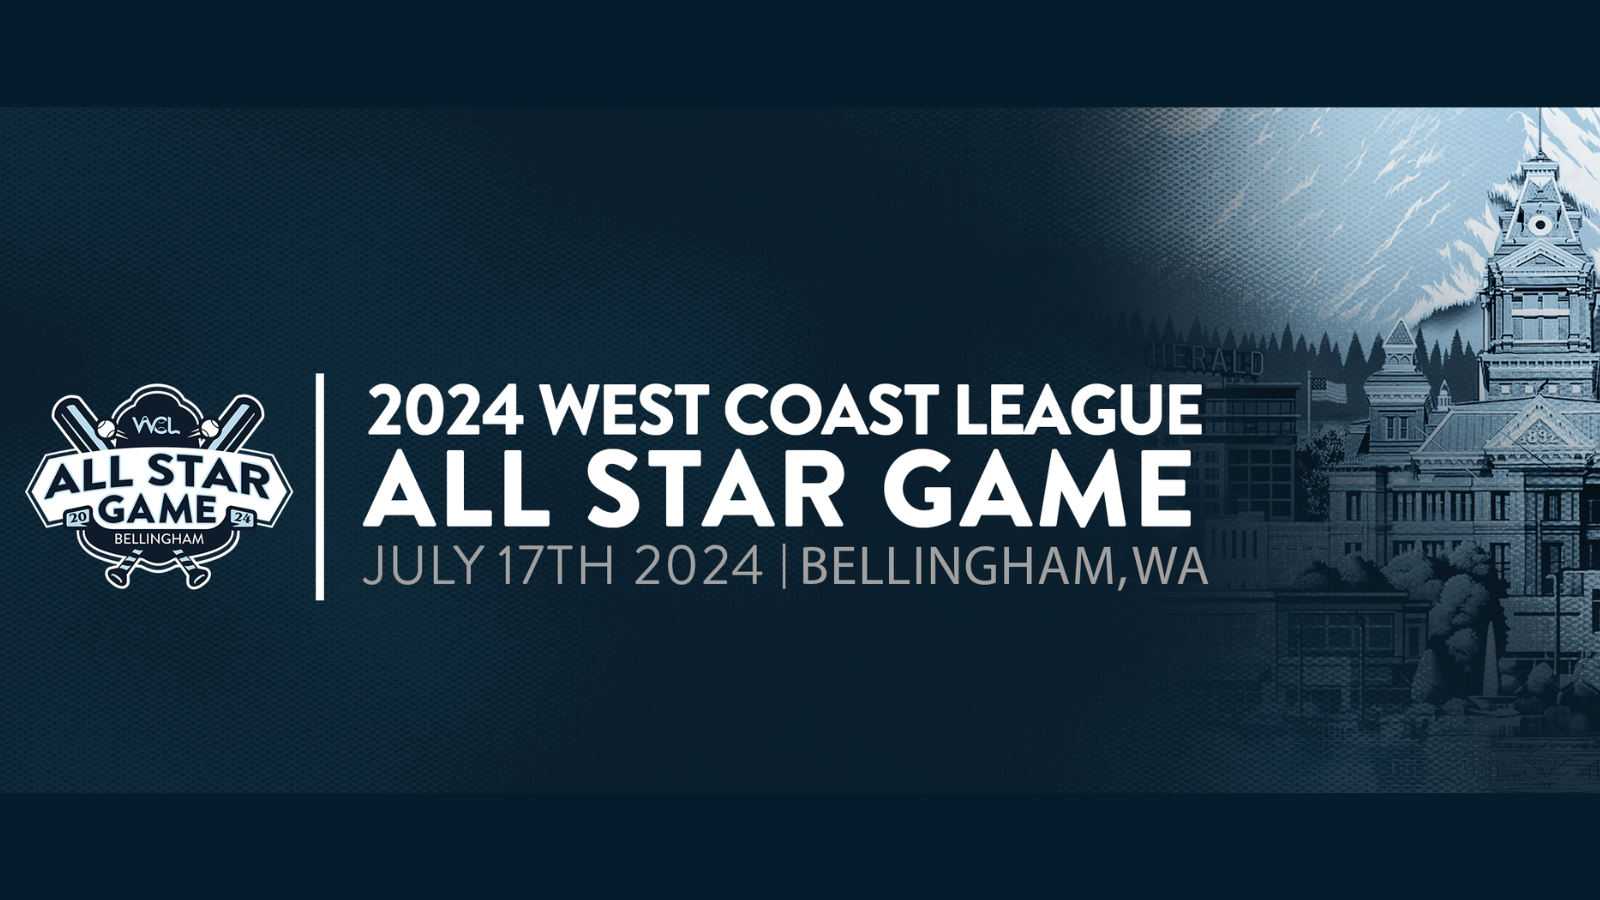 West Coast League and Bellingham Bells Announce Return of All-Star Game in Summer 2024